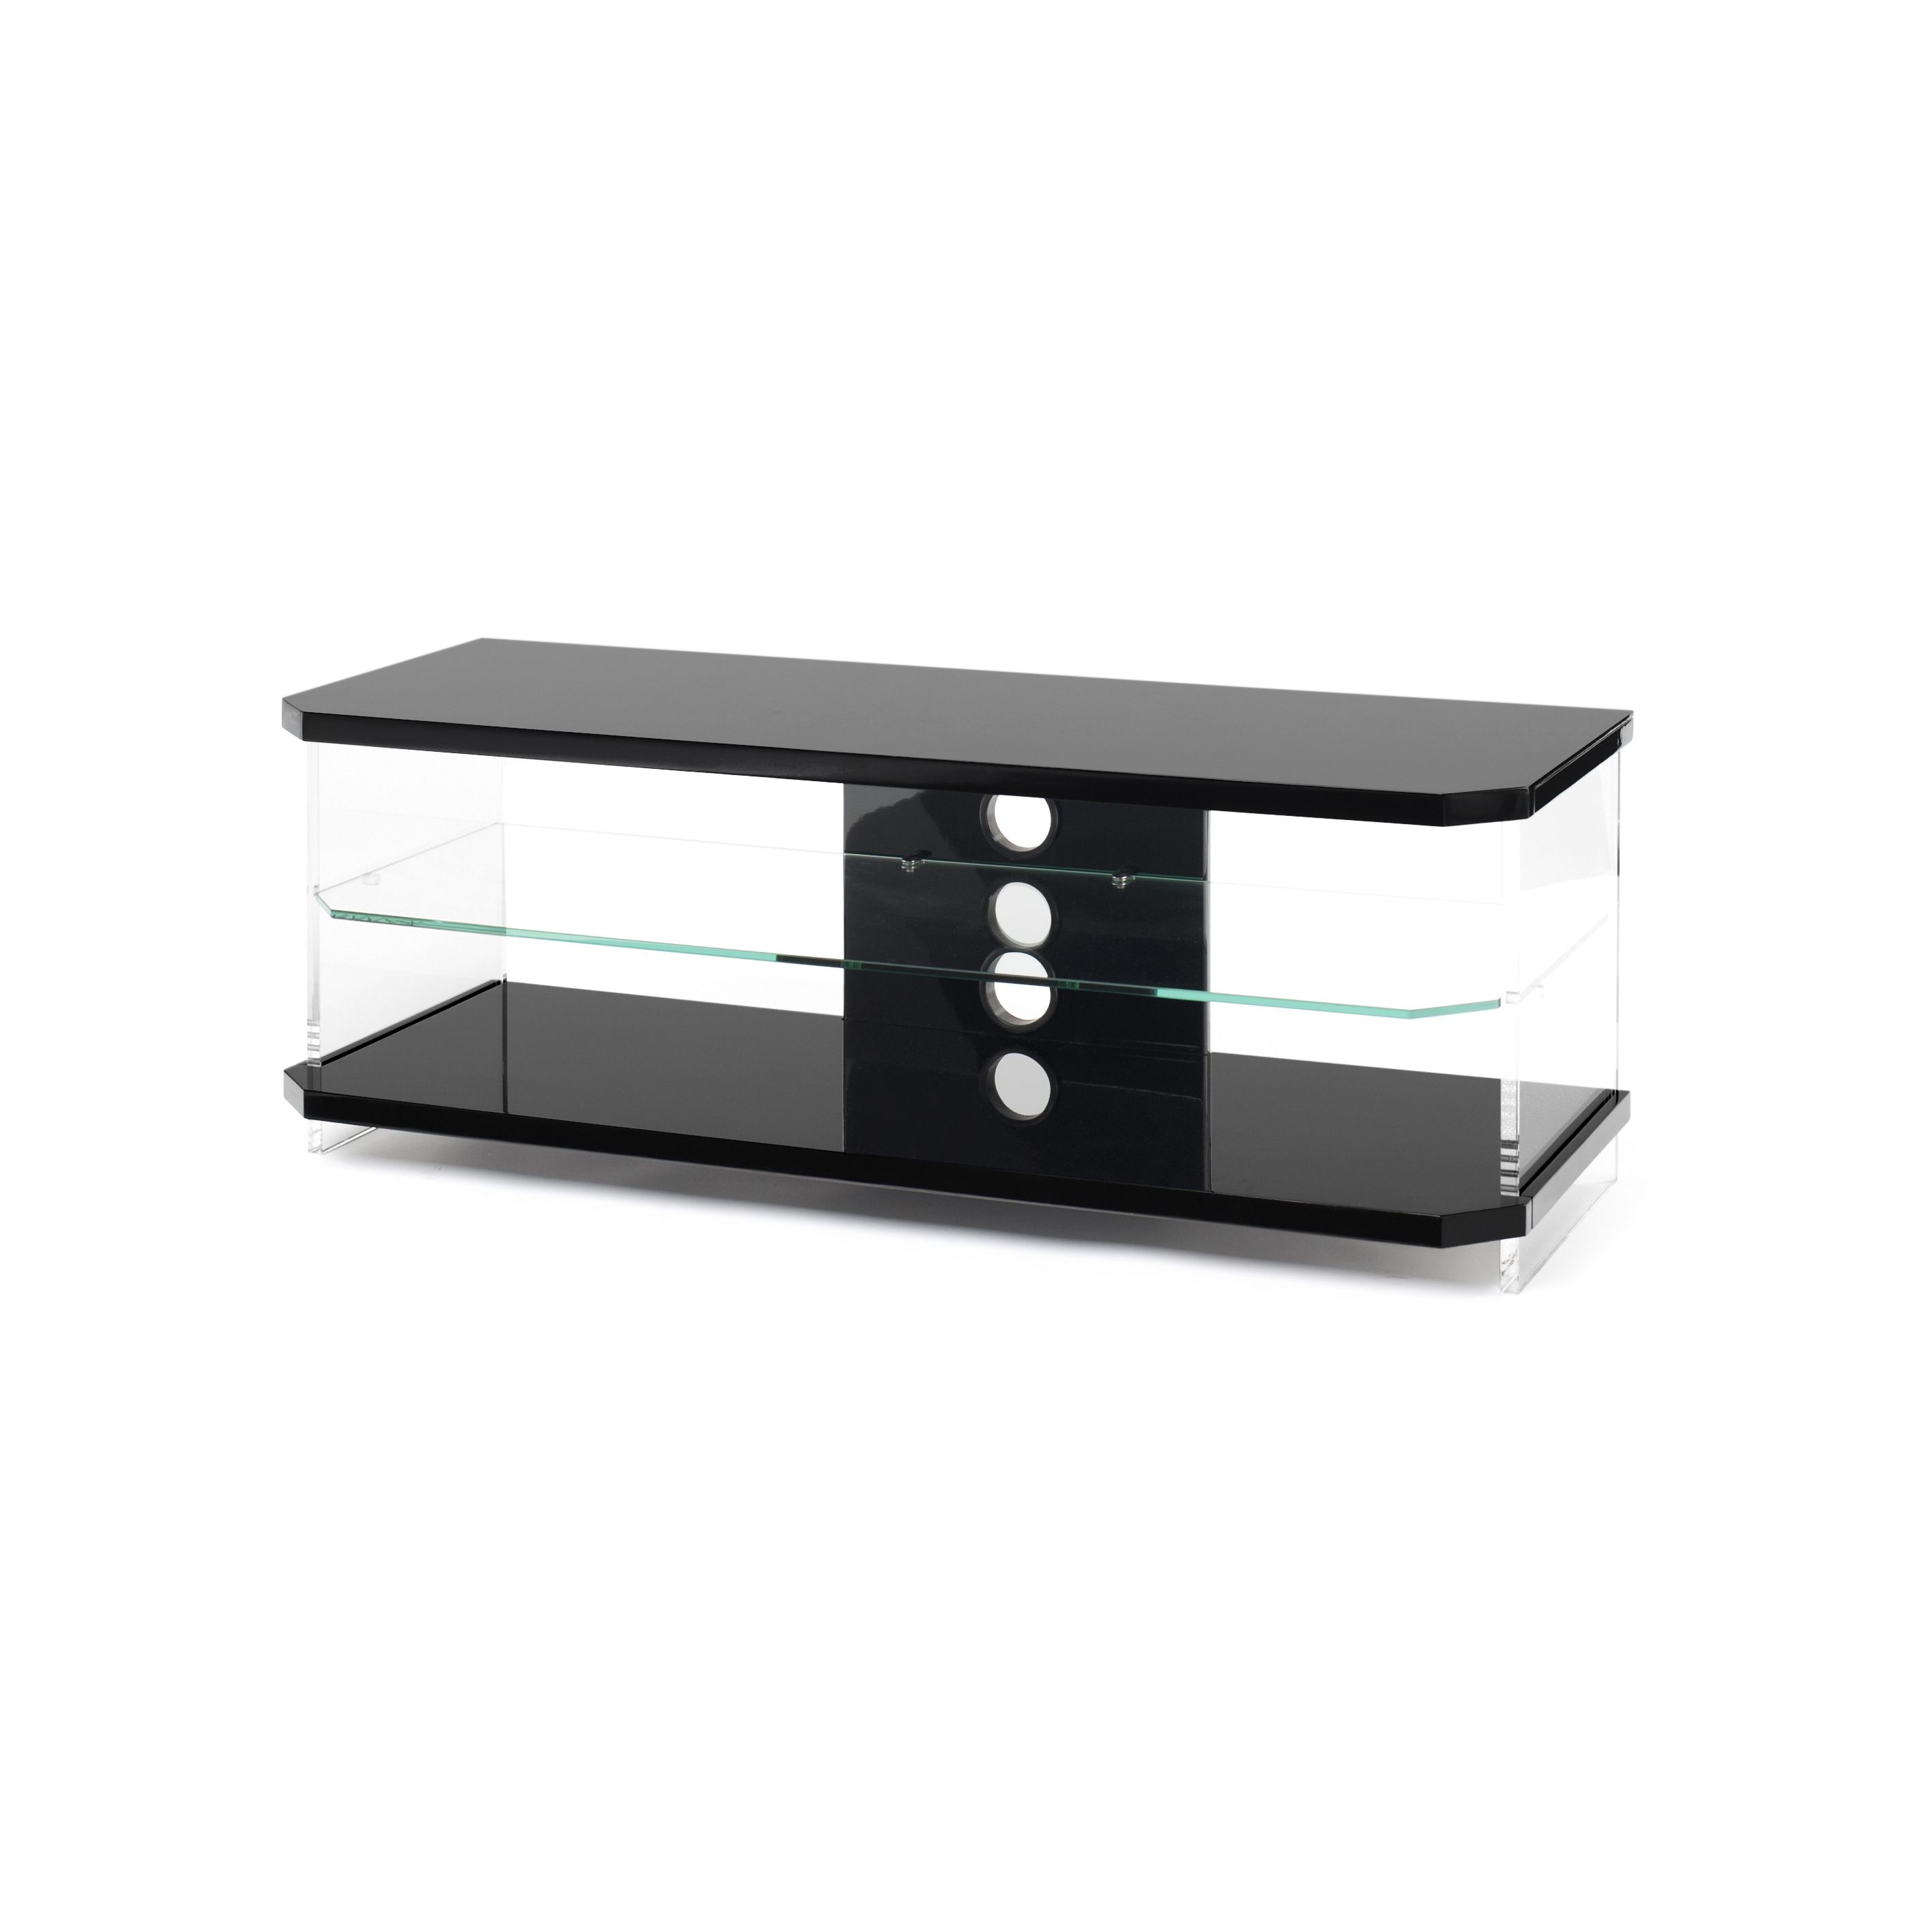 Techlink – Black Tv Stands For Favorite Techlink Air Tv Stands (View 4 of 20)